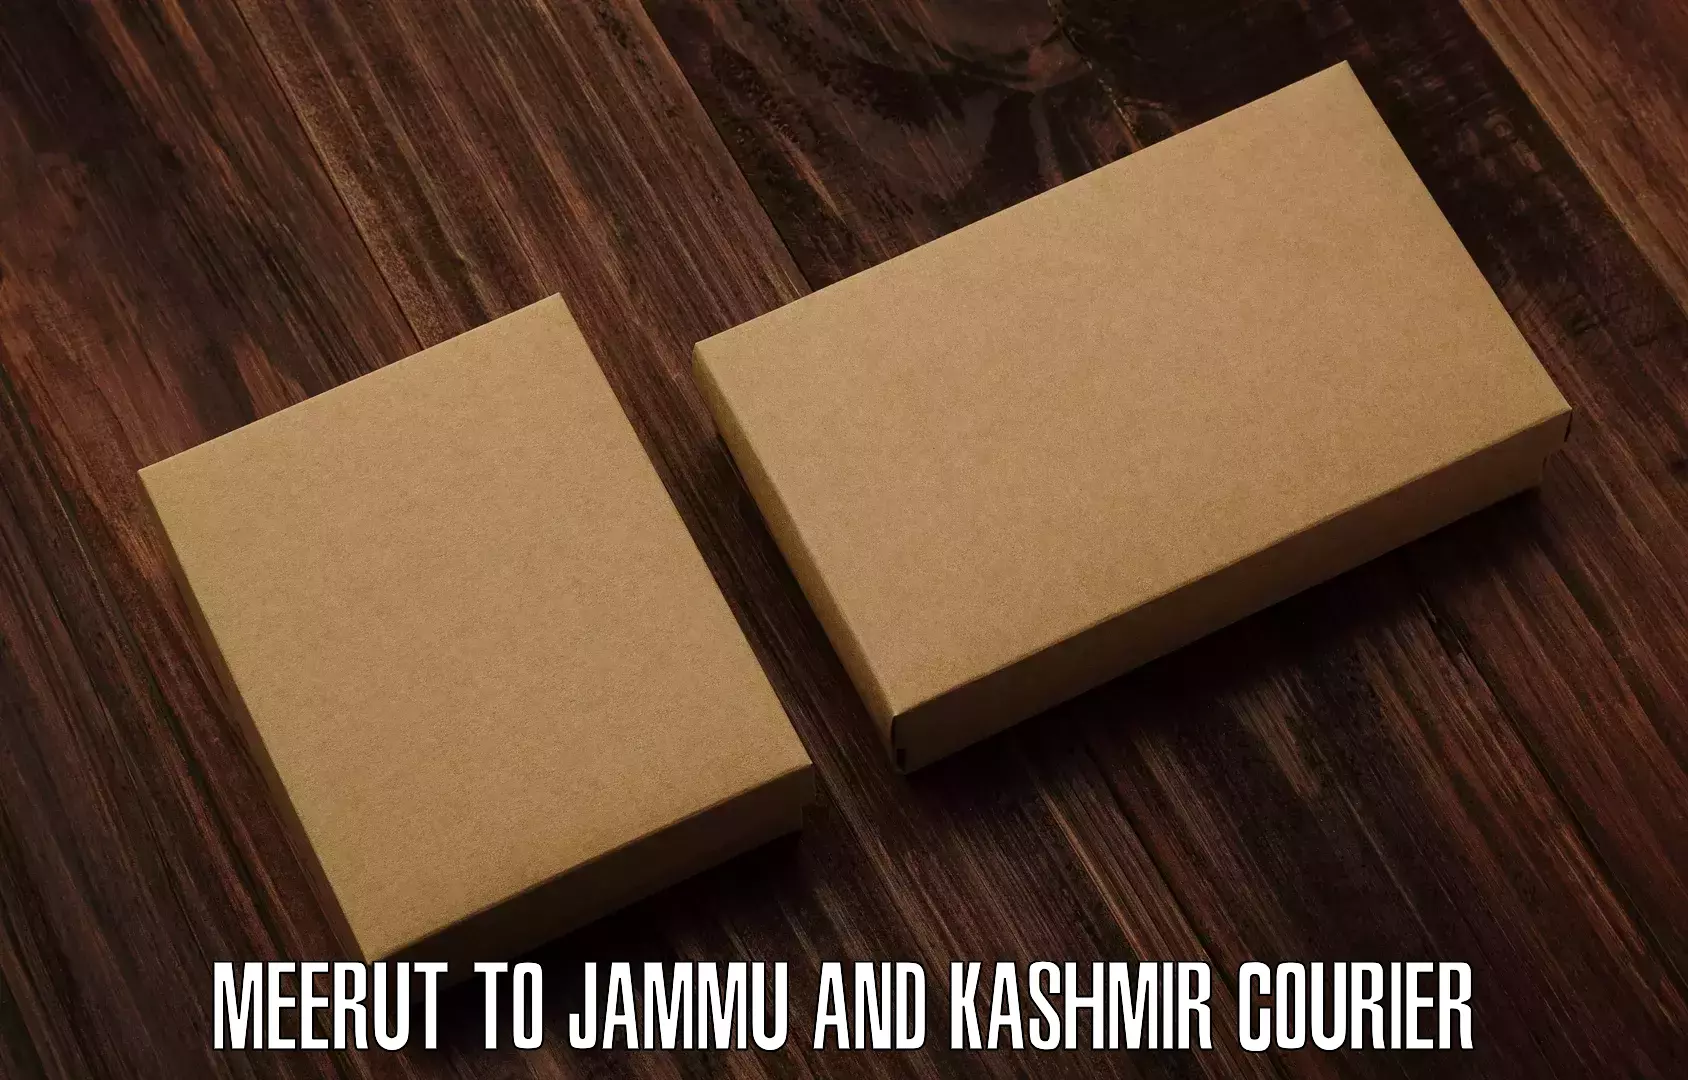 Advanced delivery network Meerut to Jammu and Kashmir